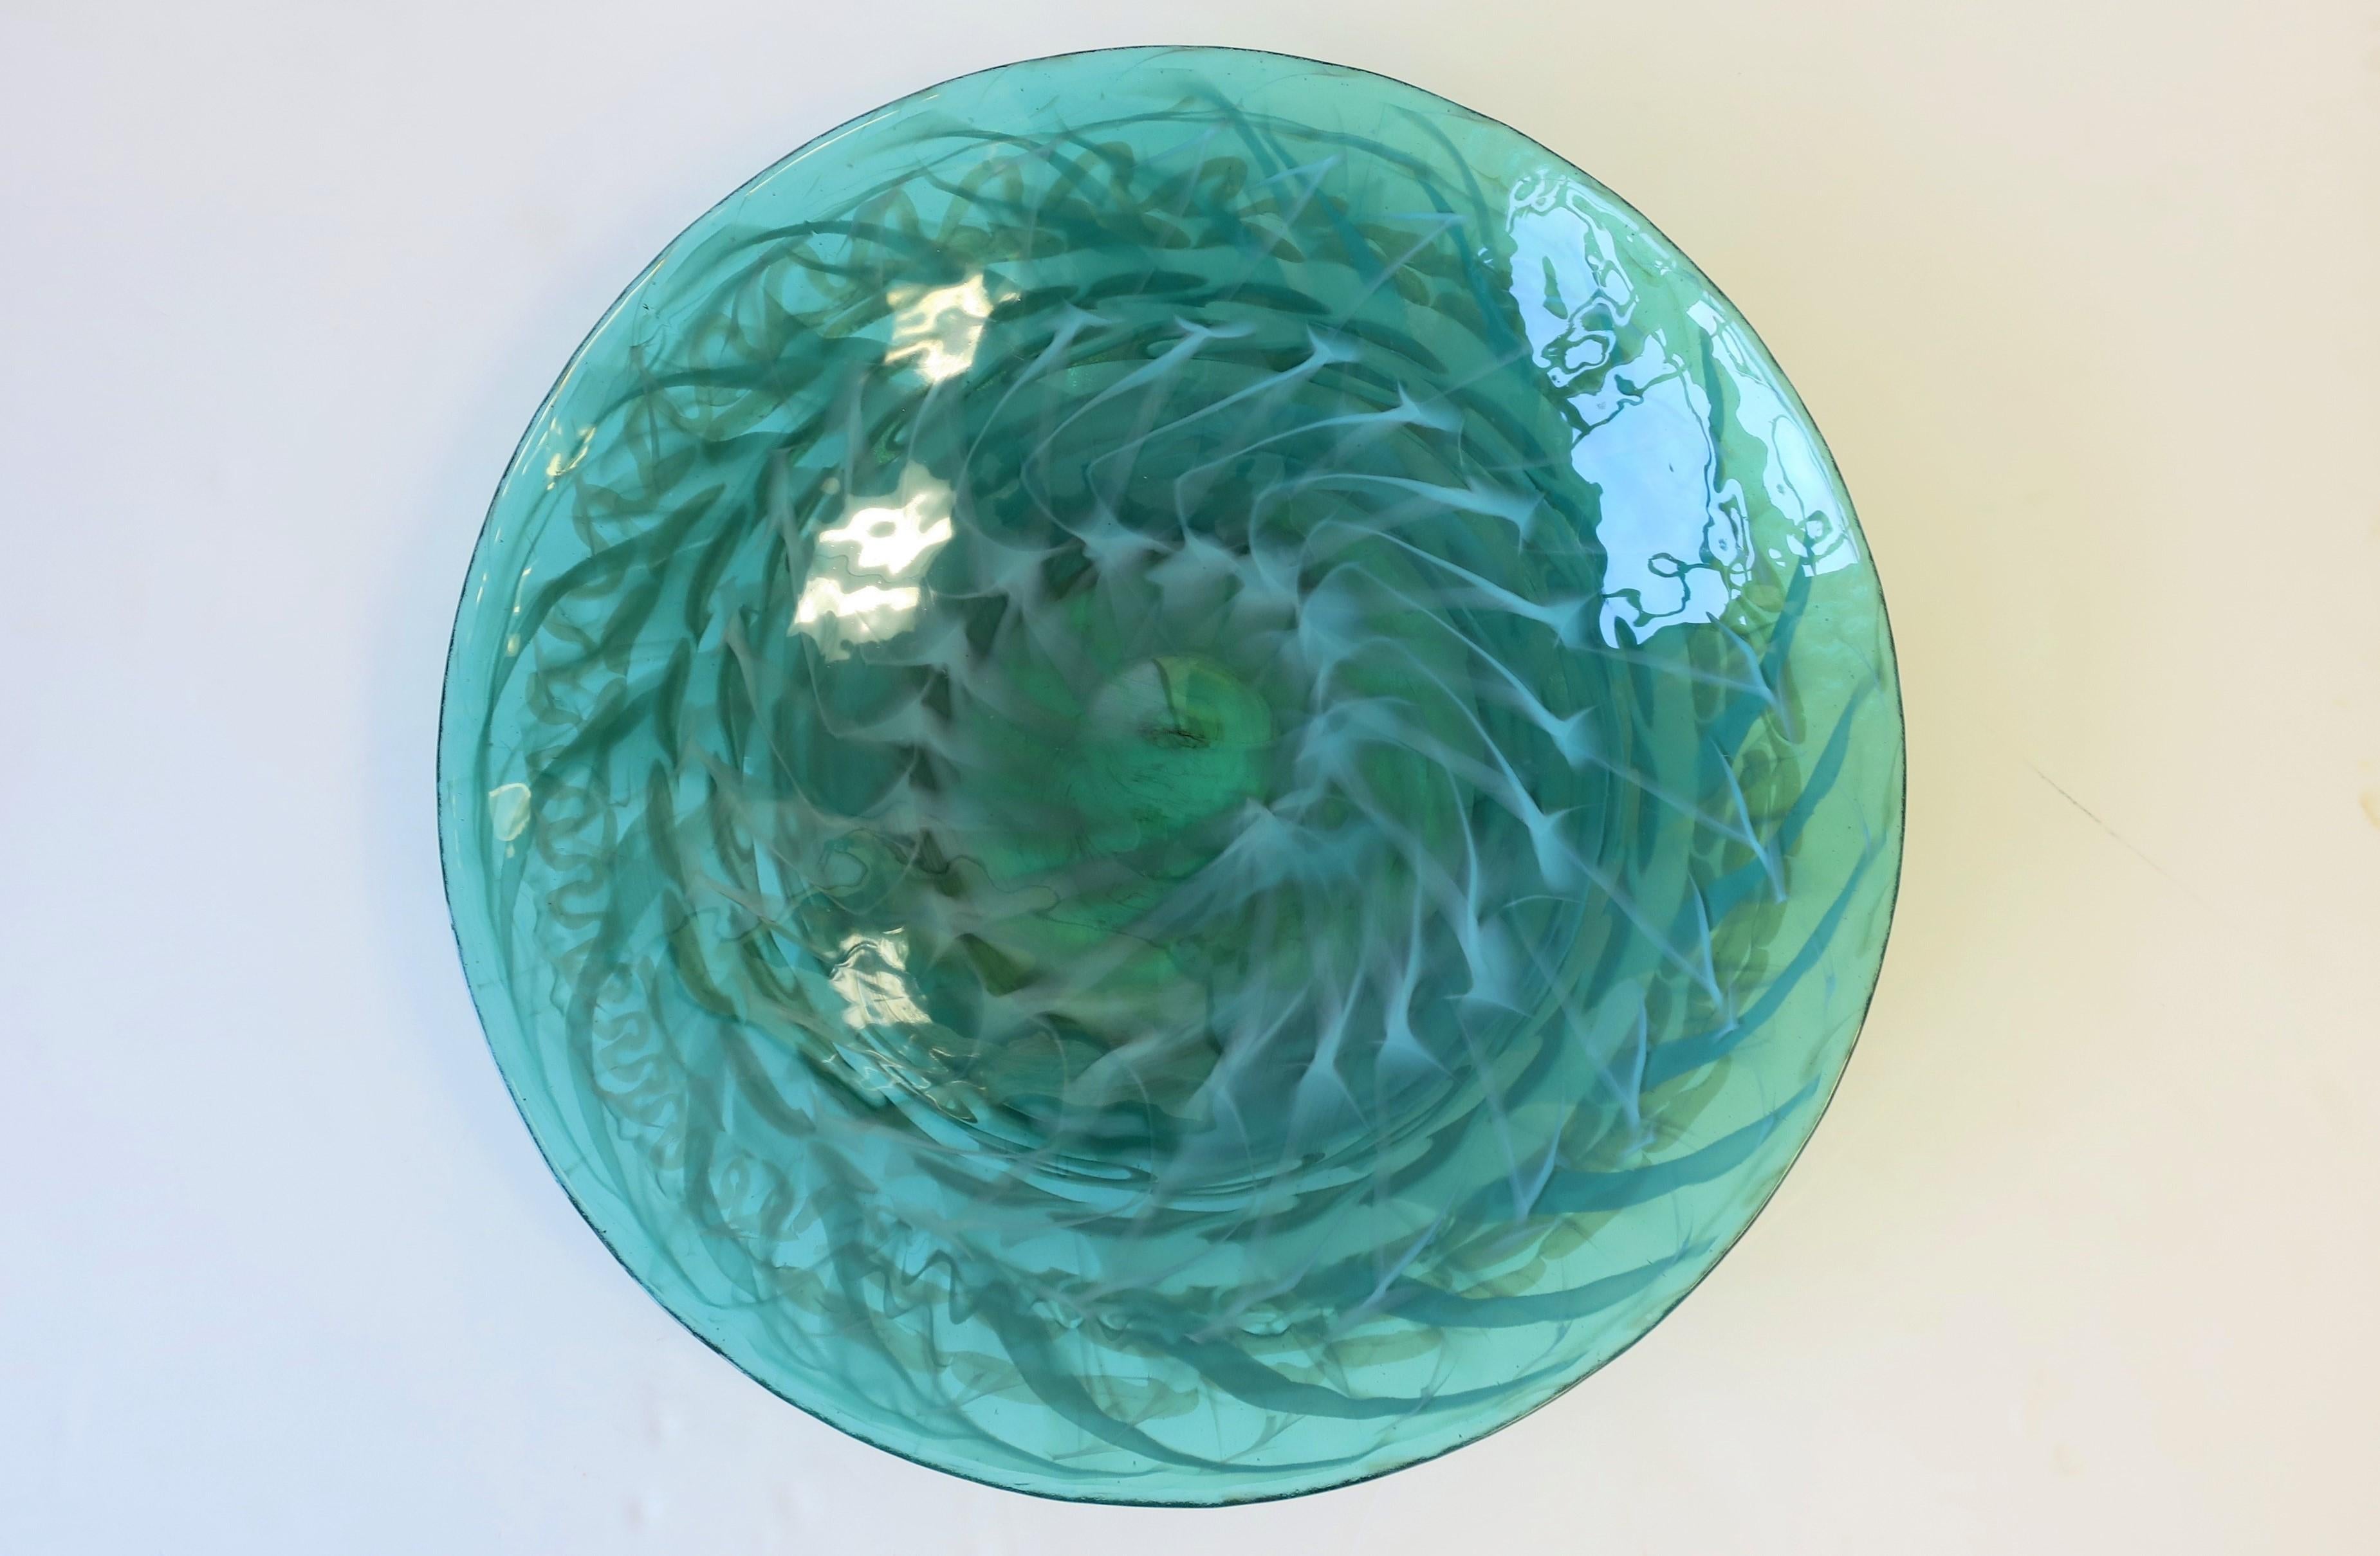 A very beautiful large round emerald green and white Italian Murano art glass centerpiece bowl. Bowl is predominantly emerald green with touches of white. A quarter placed next to bowl in image #3 to show scale. Marked on bottom as show in image #9.